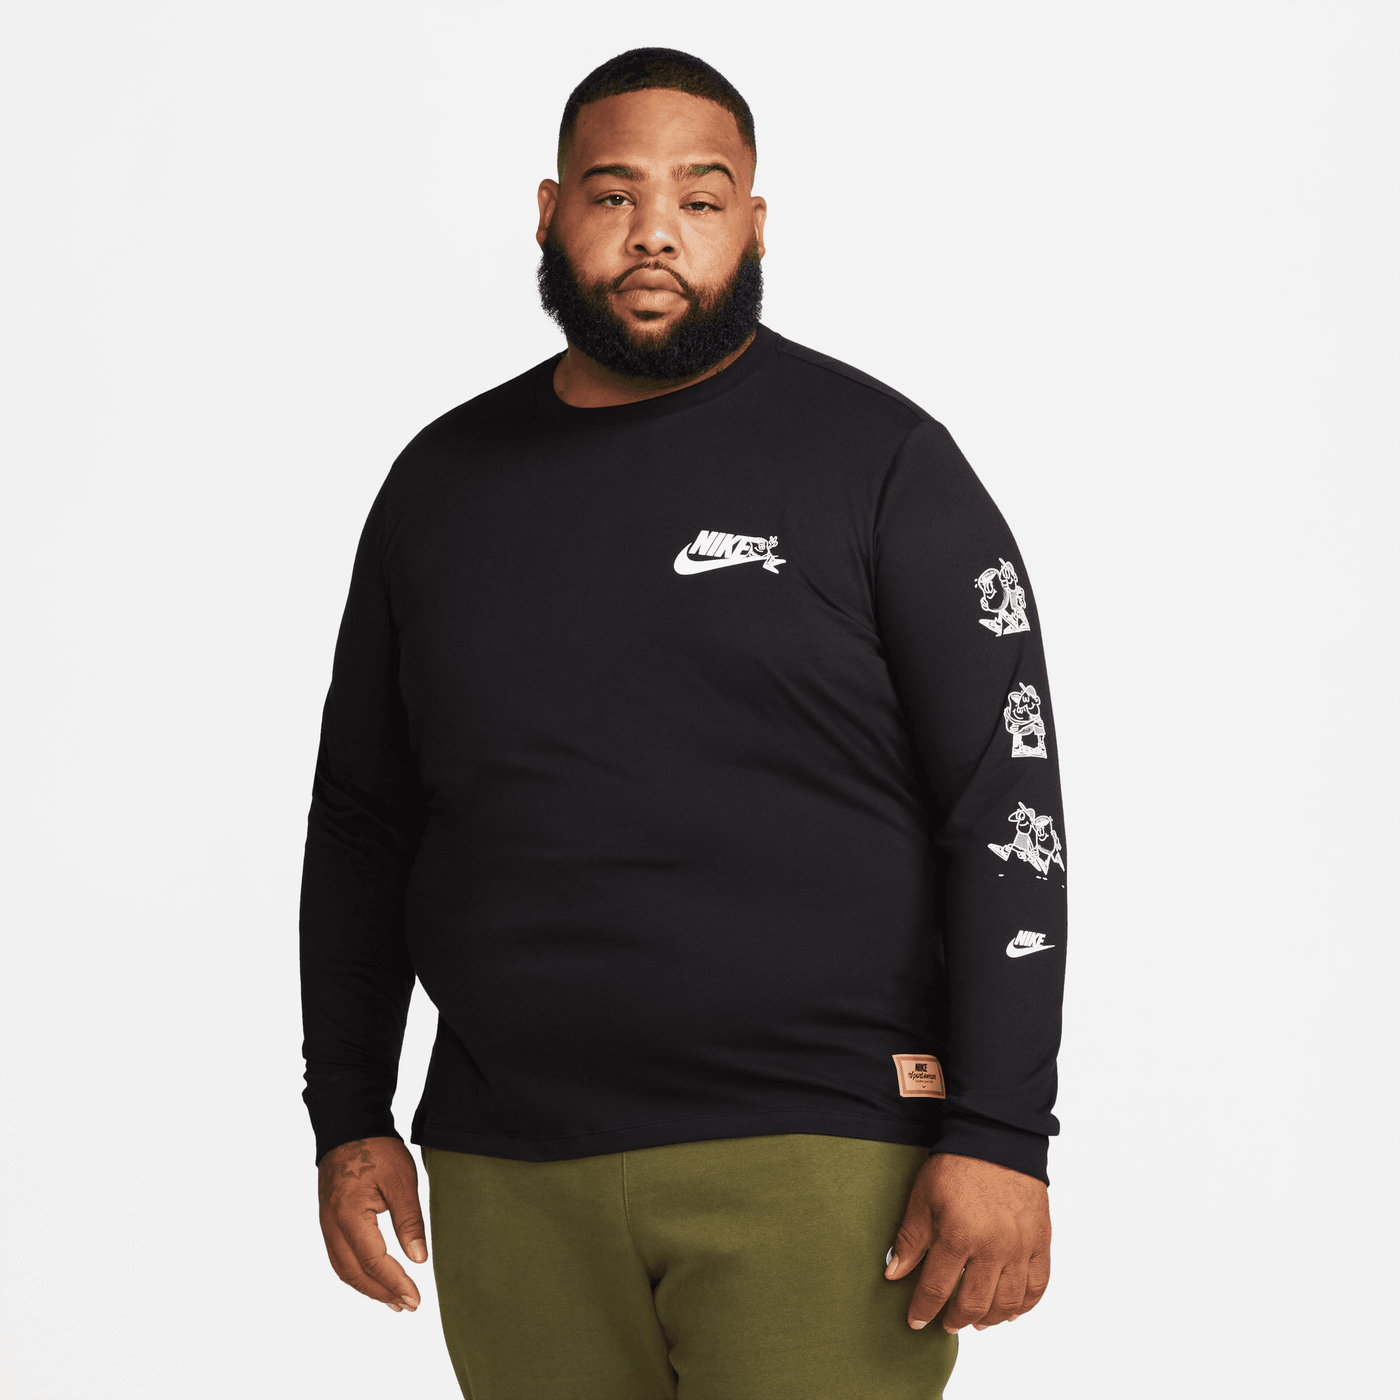 NIKE SW LONG SLEEVE TEE "BETTER TOGETHER"